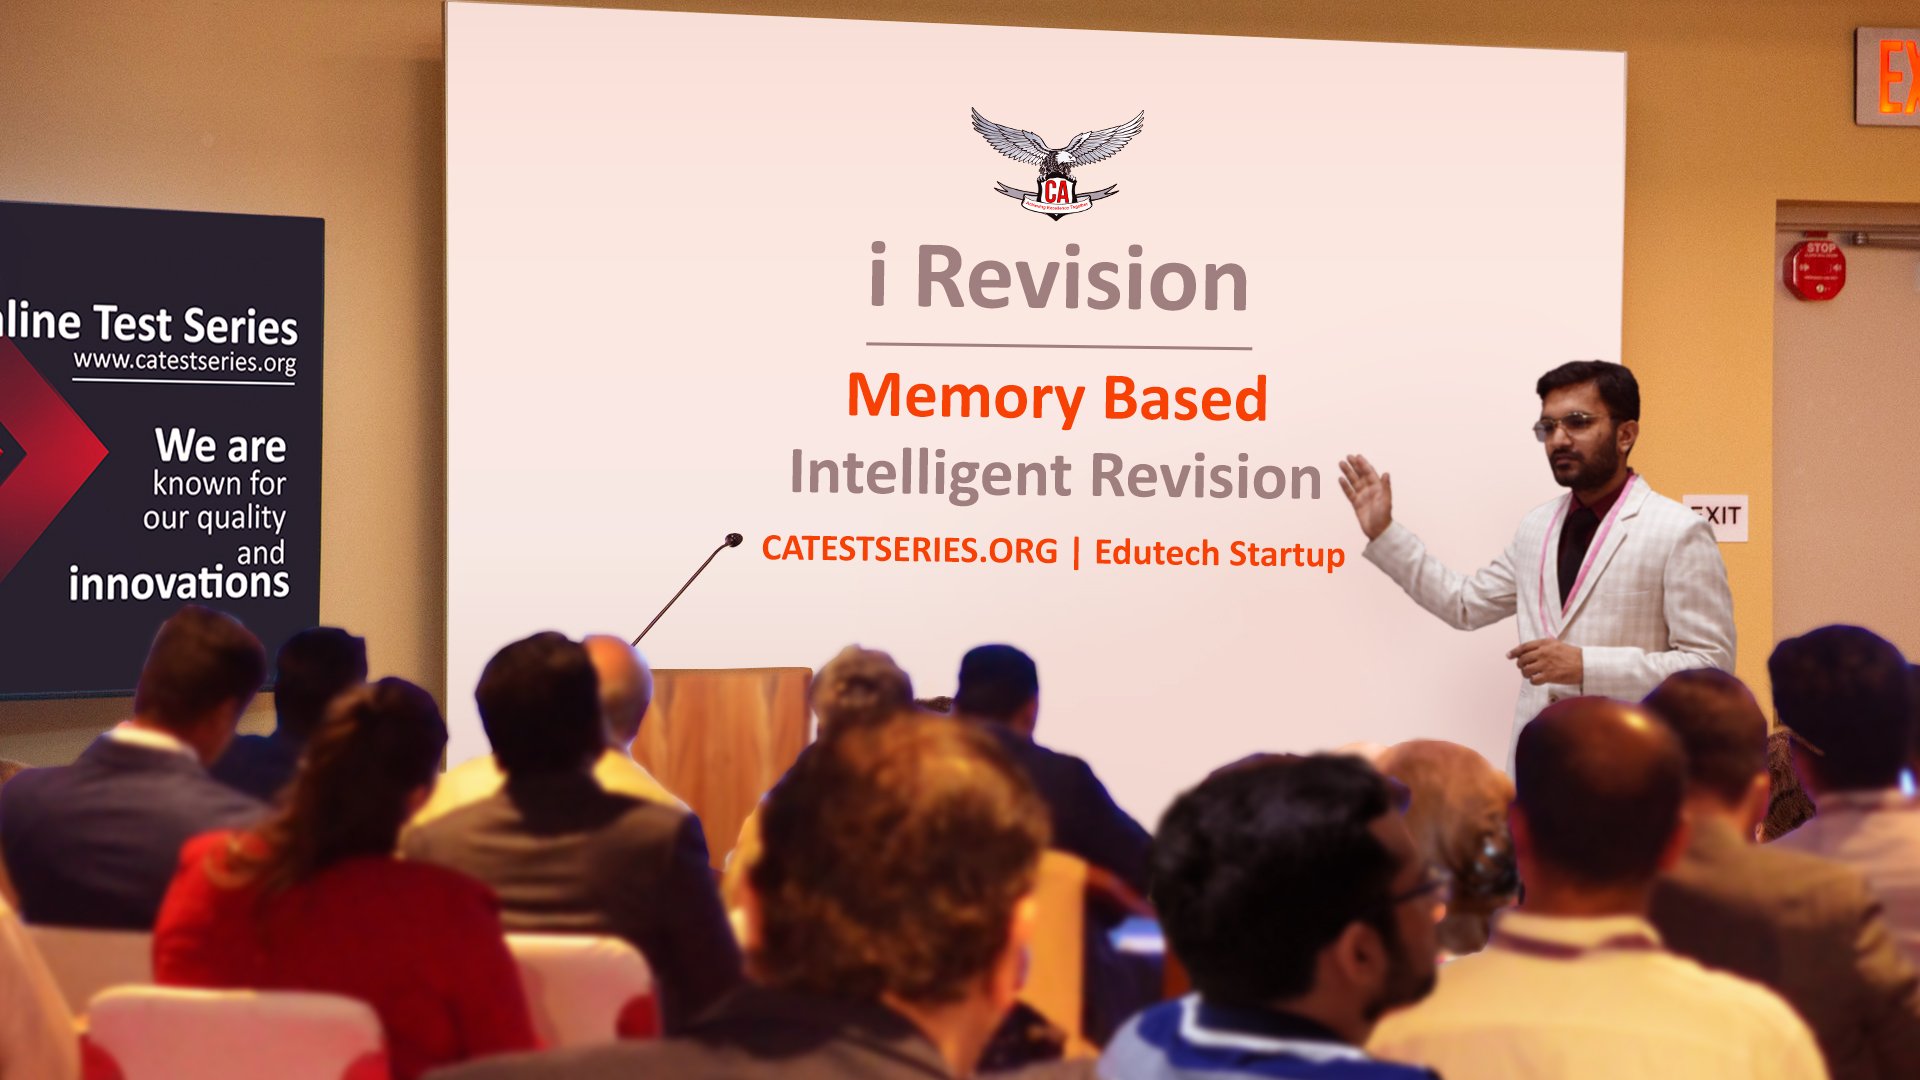 India’s most trusted test series provider ‘CA Test Series’ launches AI based revision software